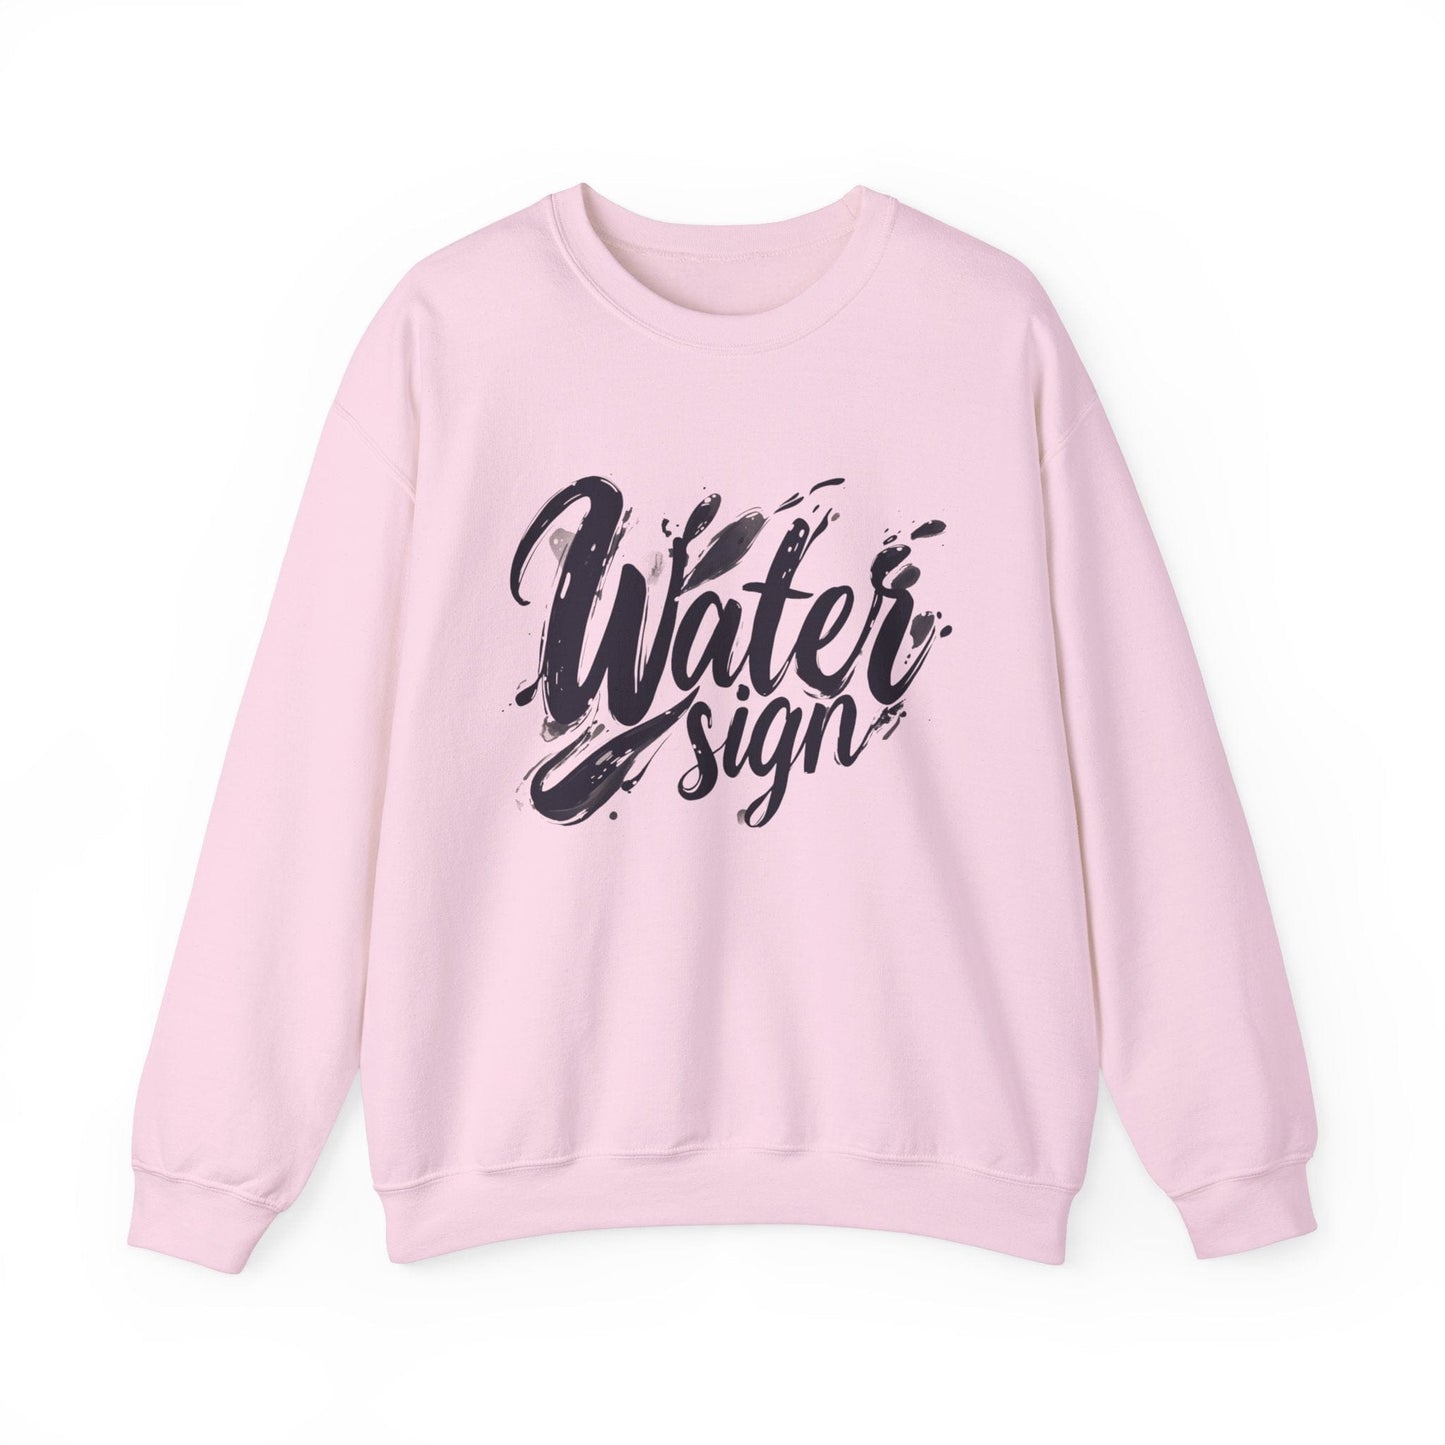 Sweatshirt S / Light Pink Fluid Essence Cancer Sweater: Waves of Intuition